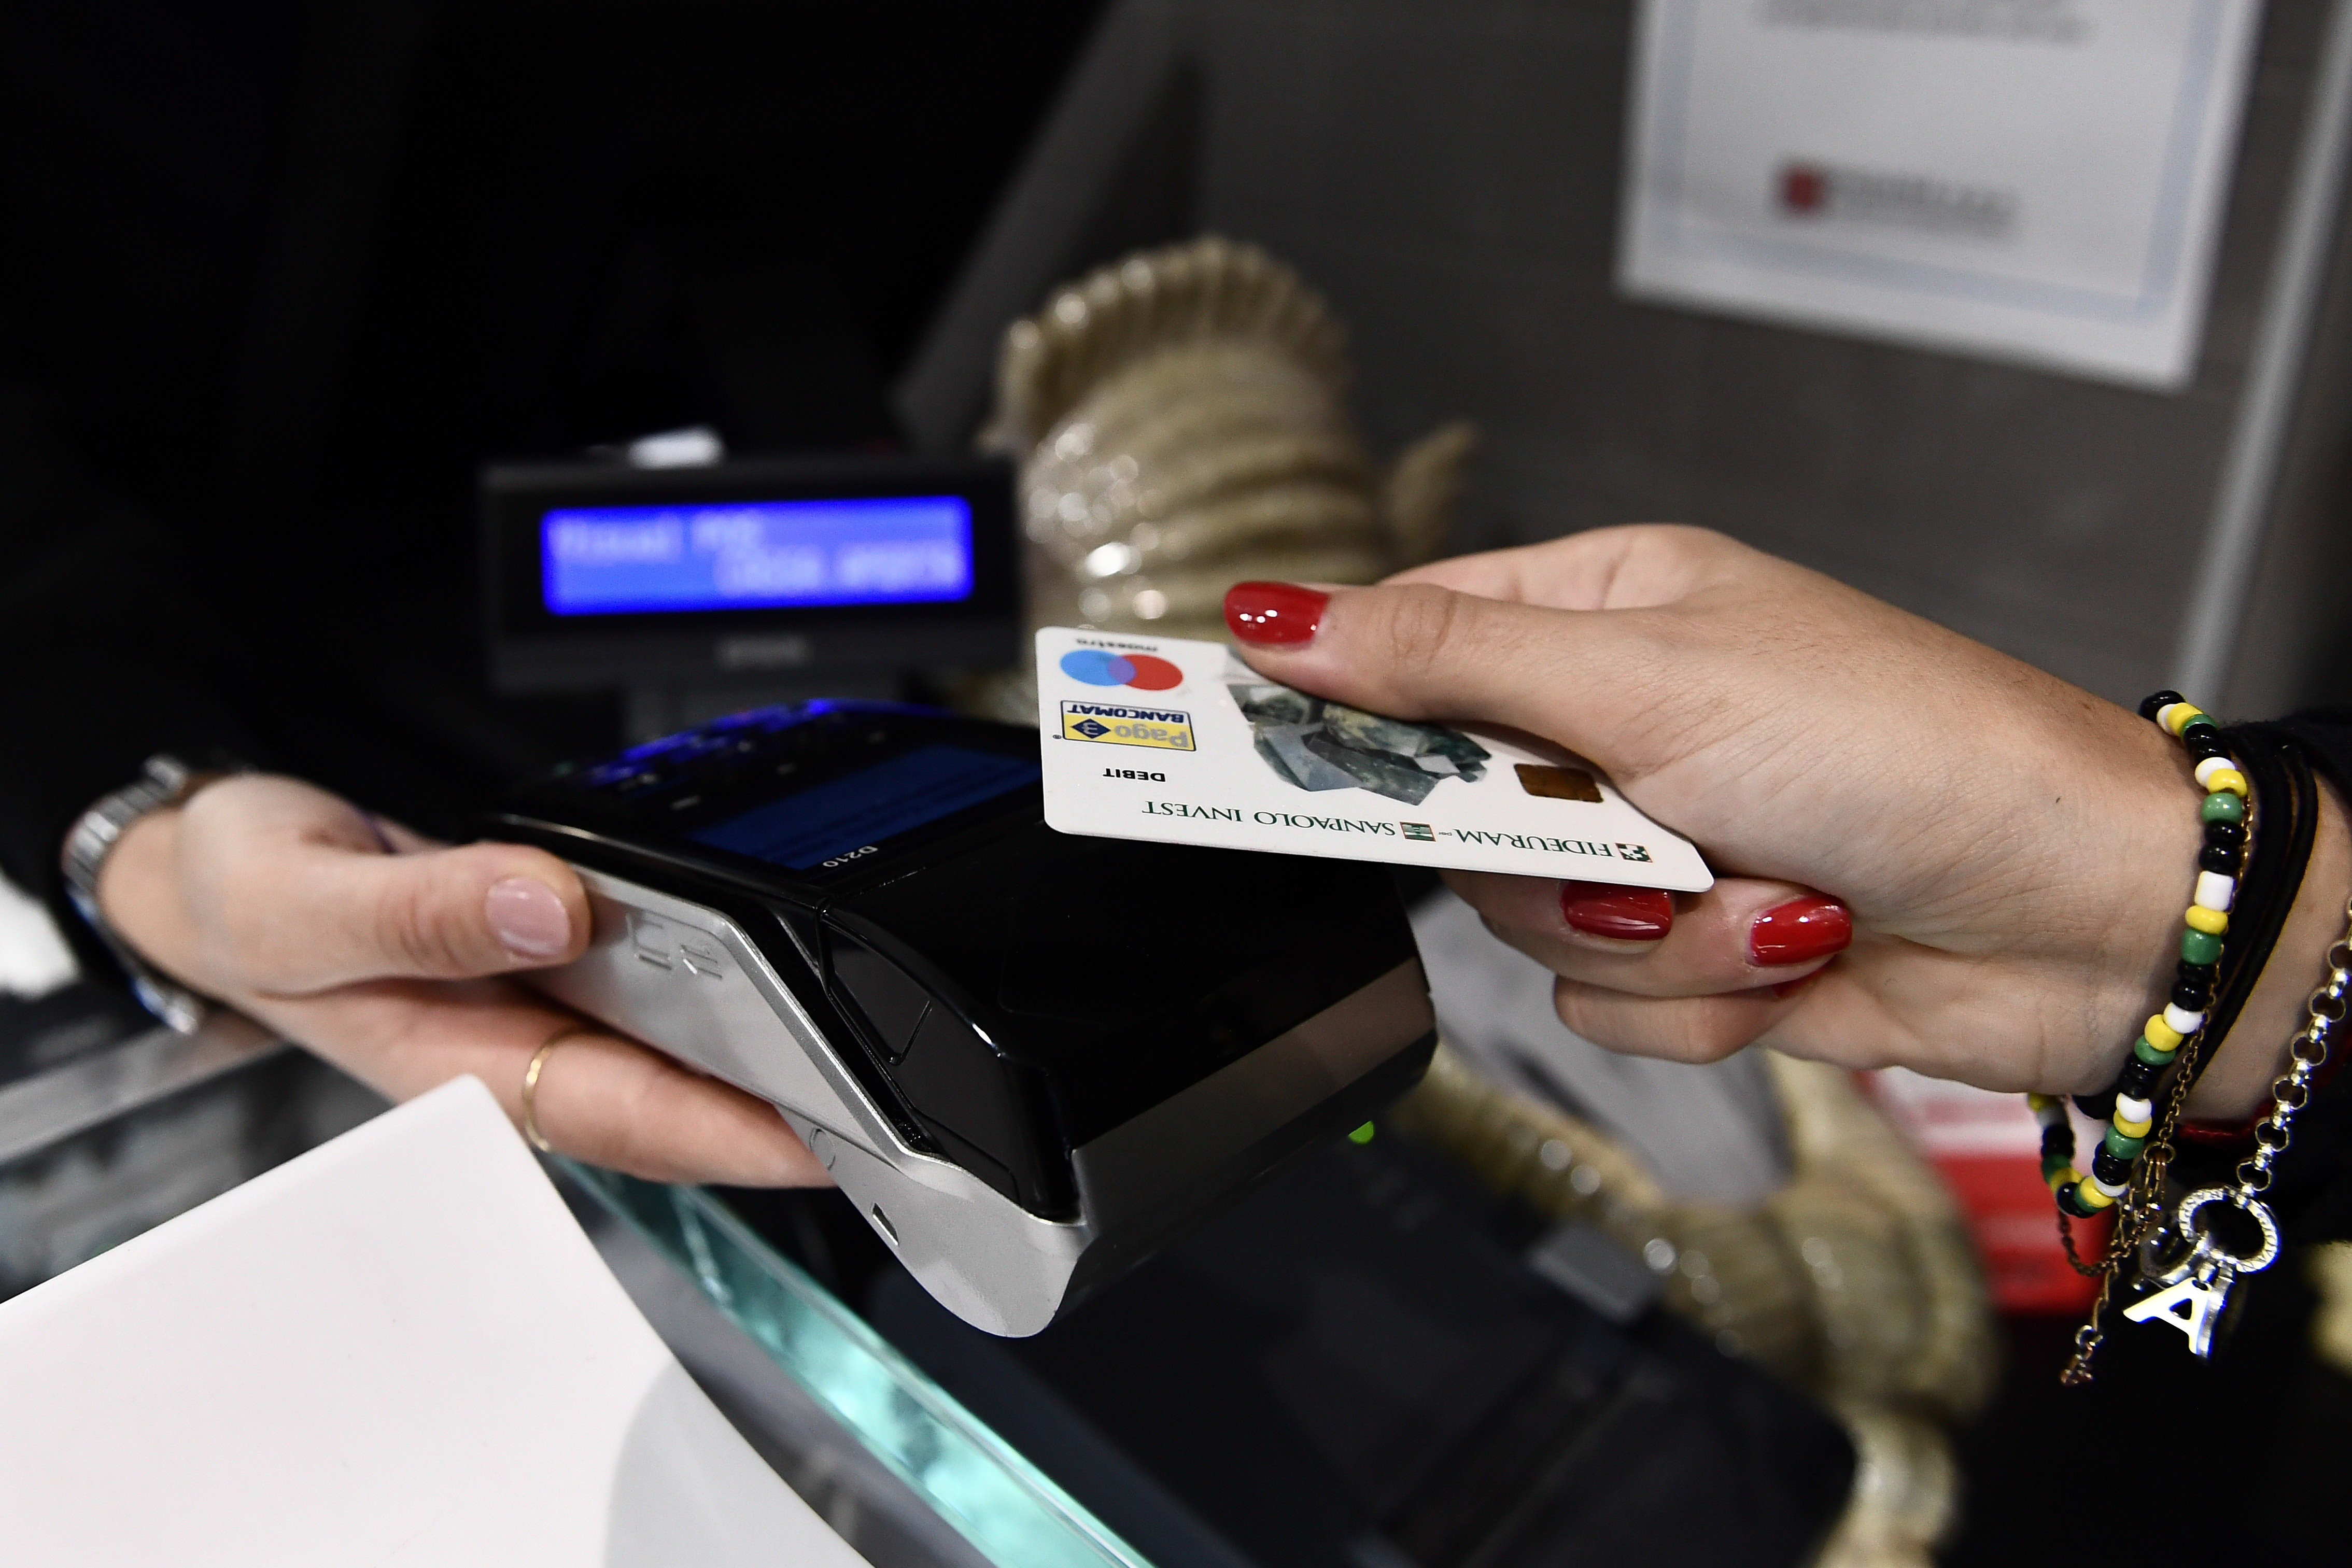 Cash vs card payments in Milan